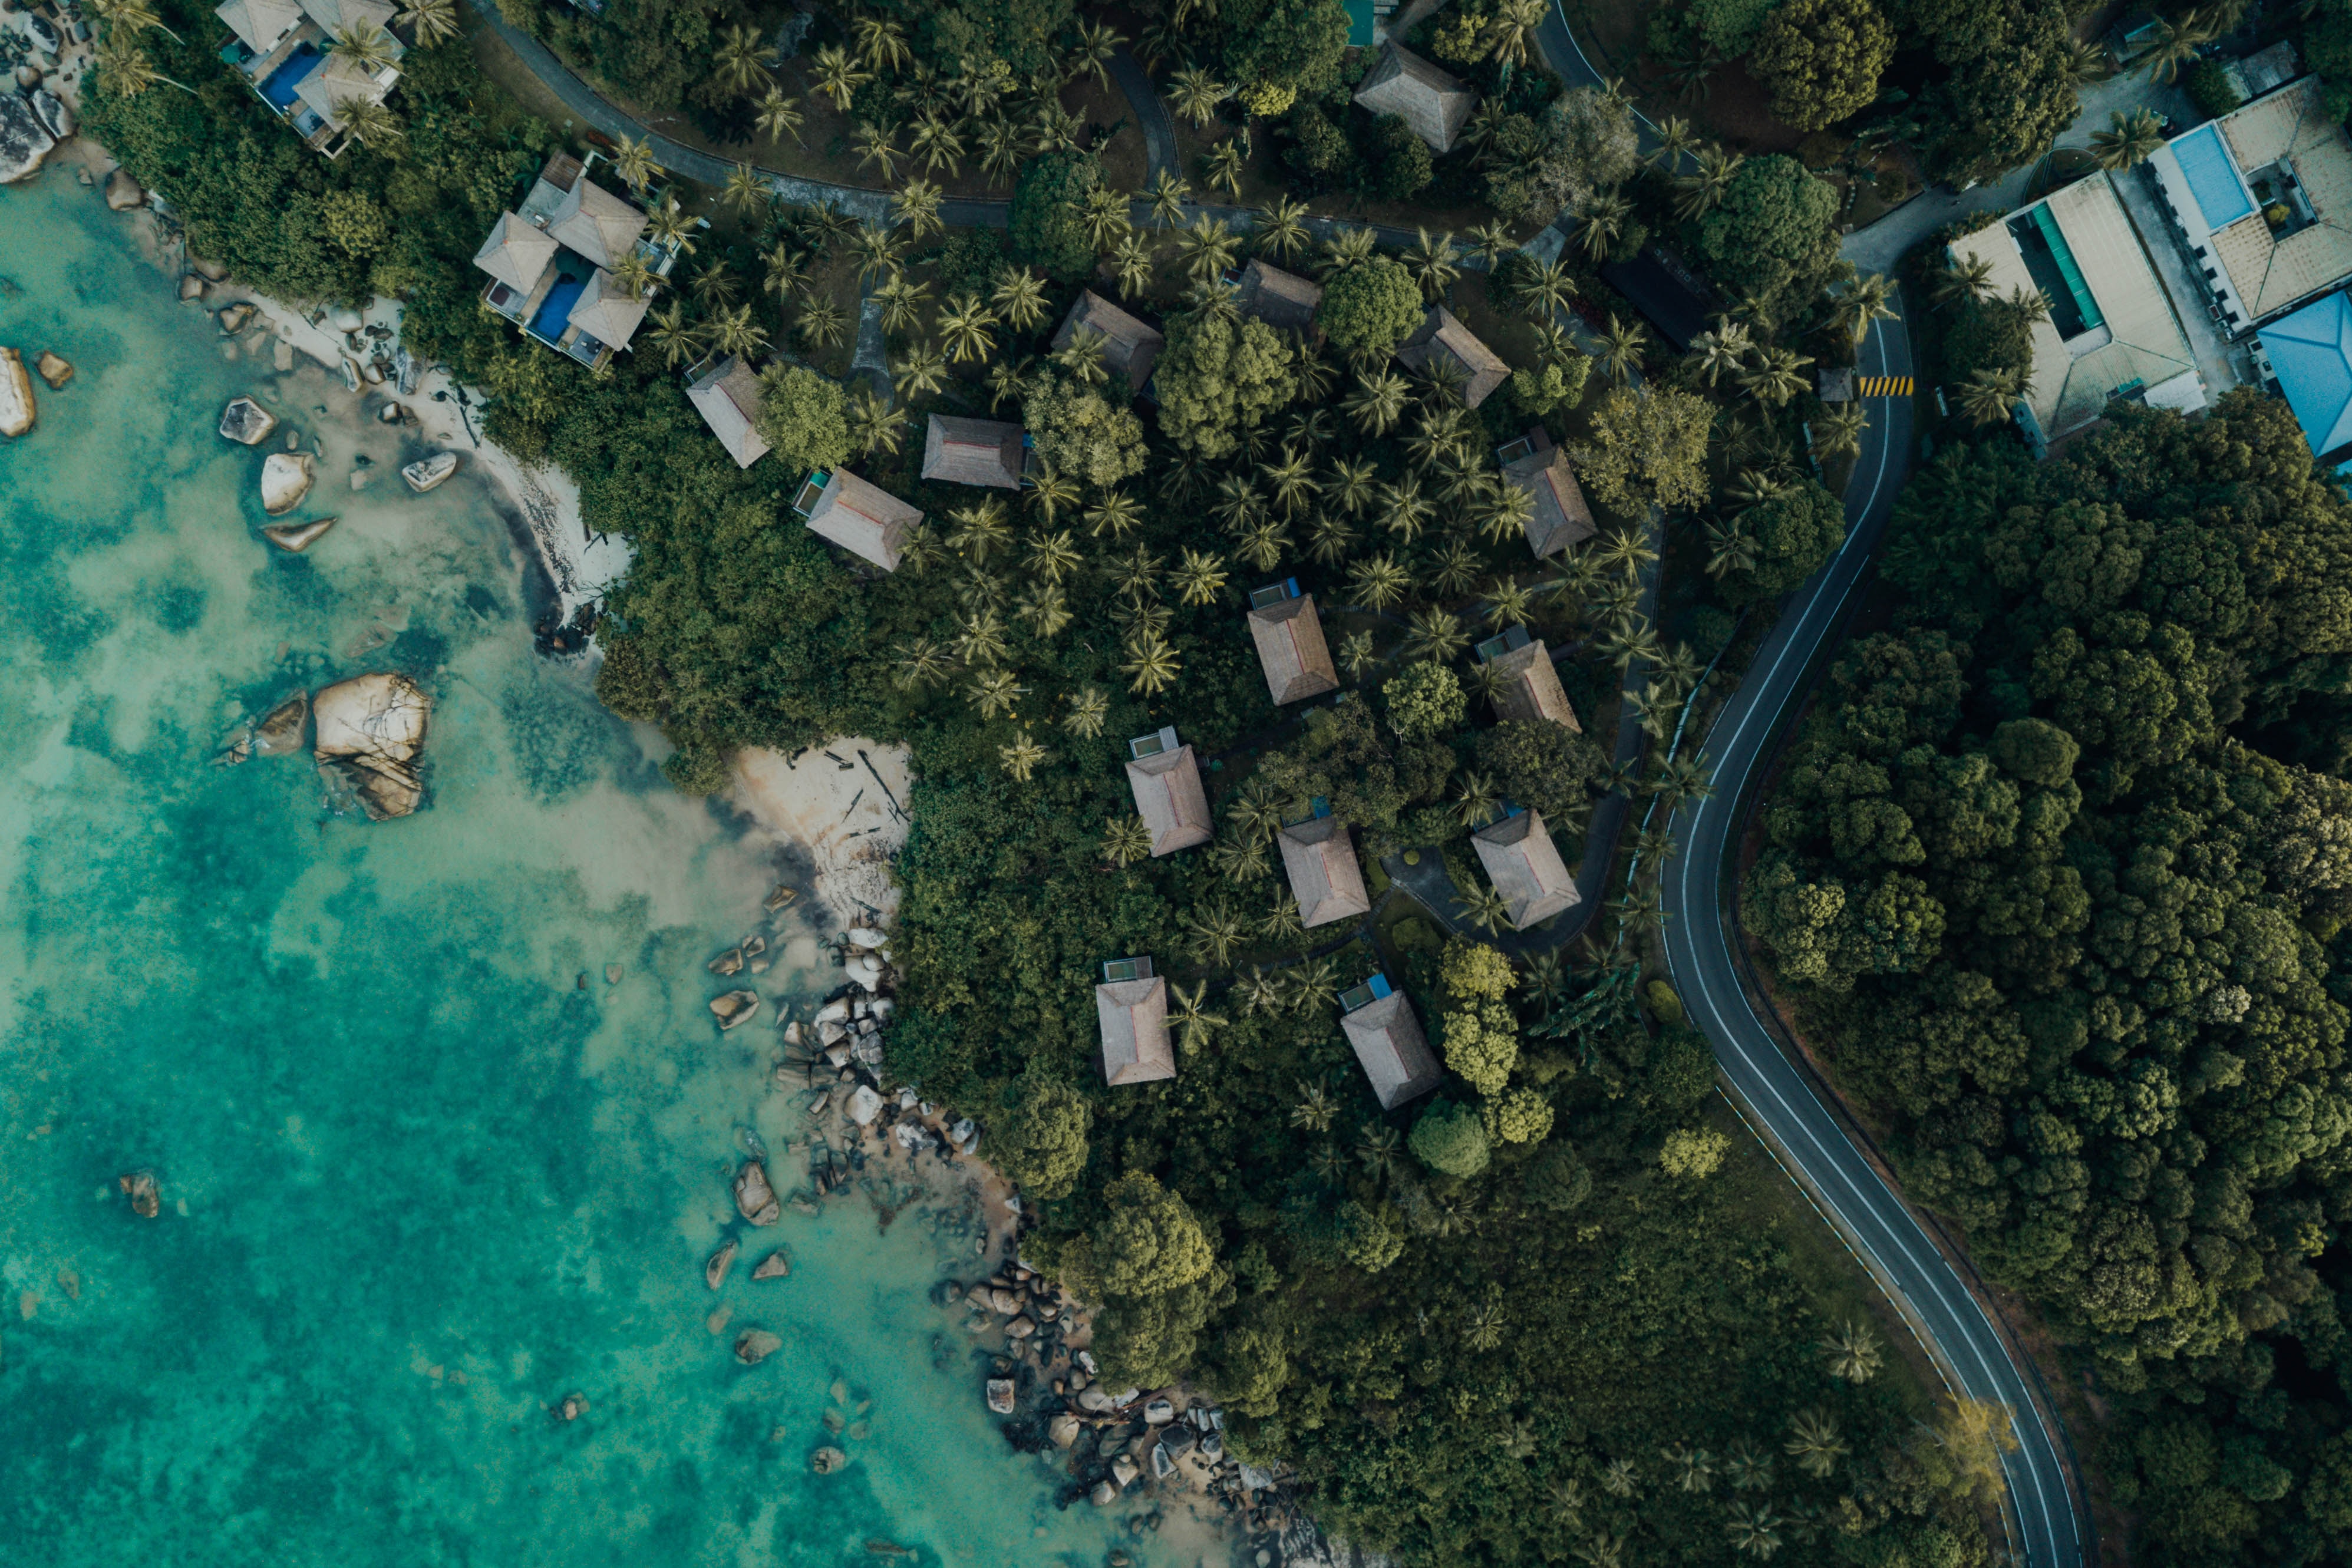 view from above, nature, trees, sea, building, shore, bank 5K